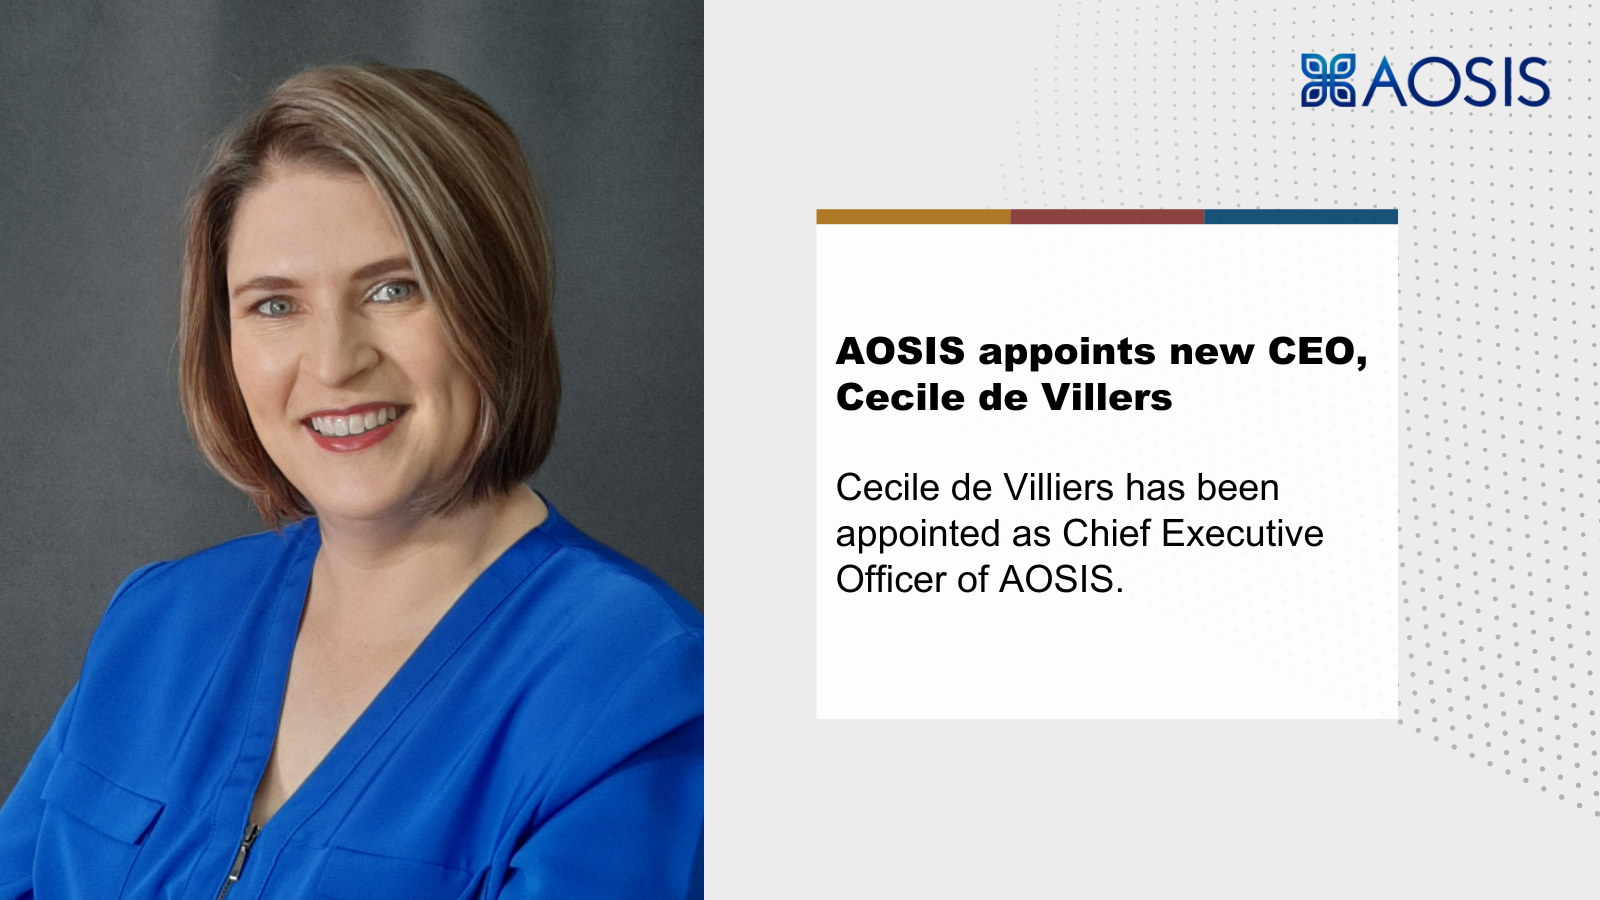 AOSIS appoints Cecile de Villers as its new CEO